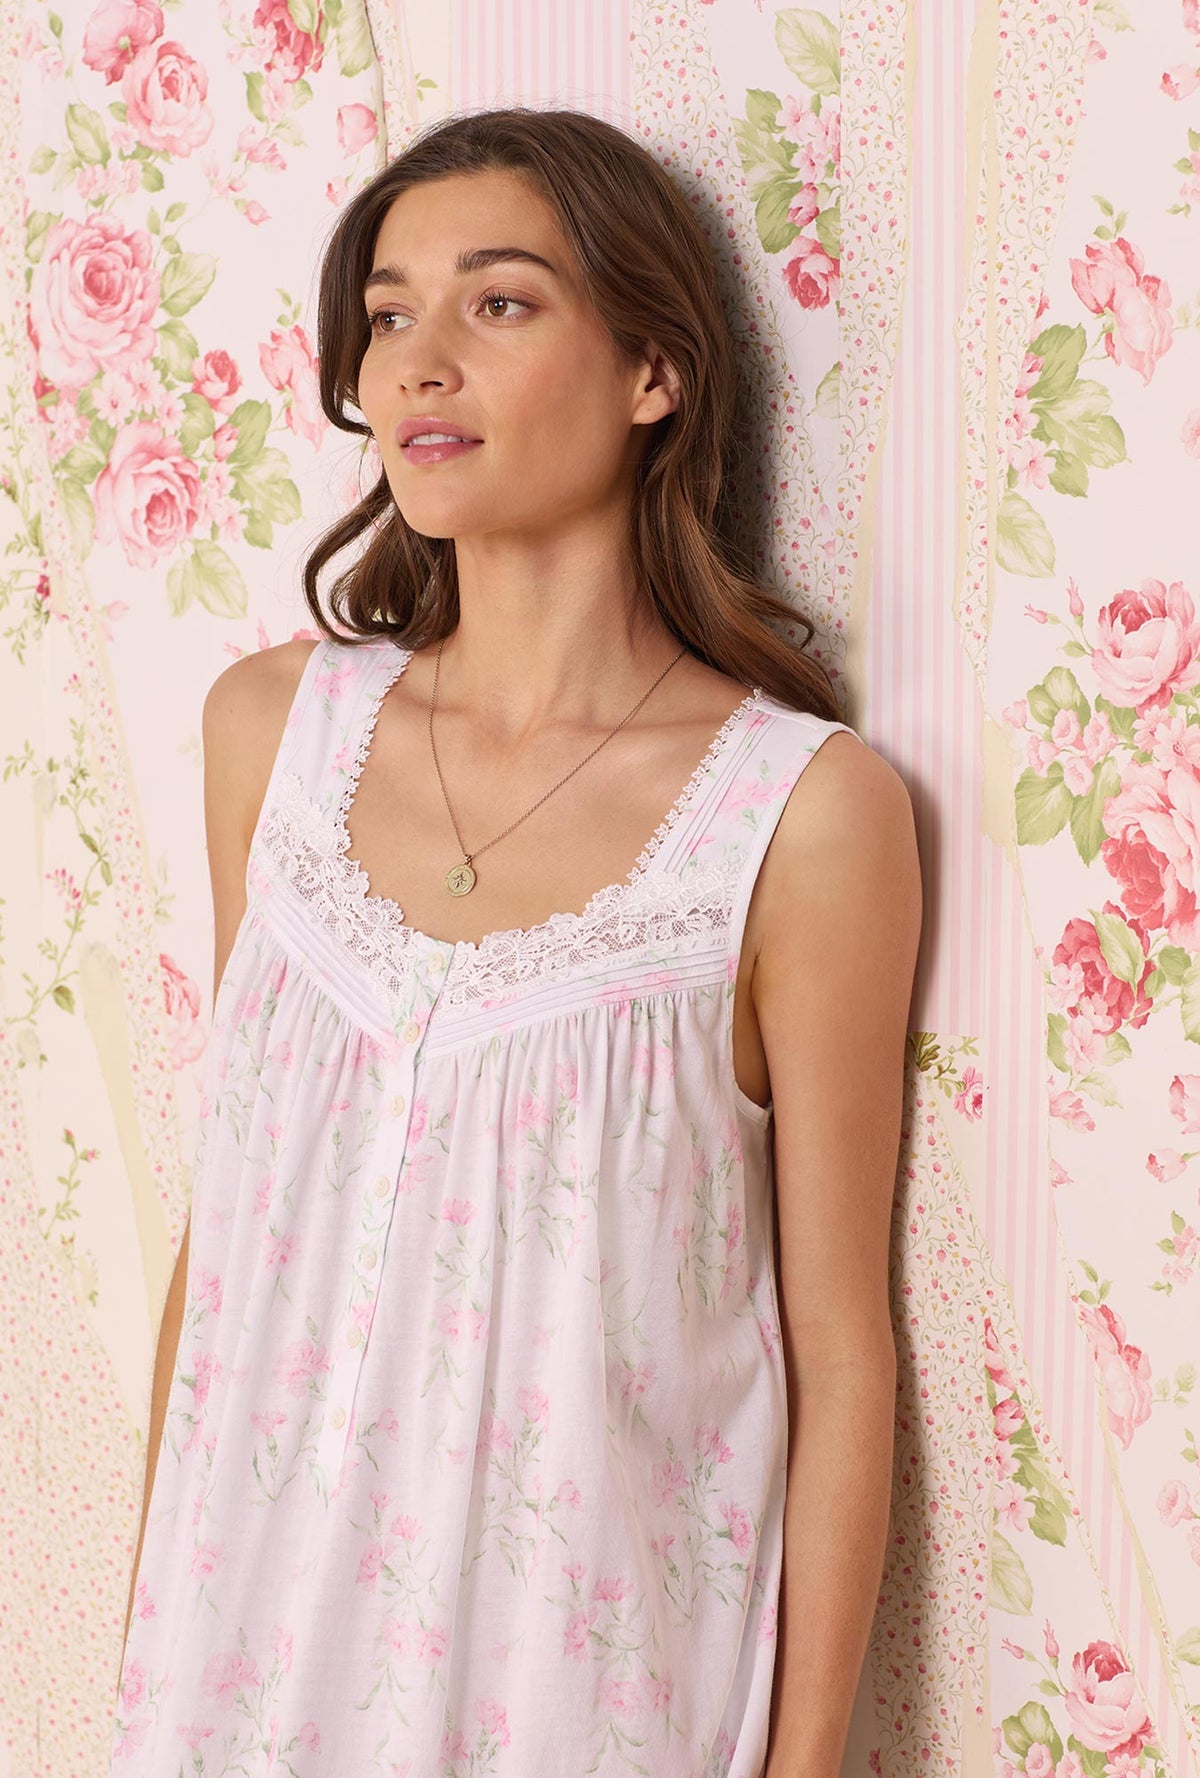   A lady wearing white sleeveless  Knit Nightgown with Whisper Floral print